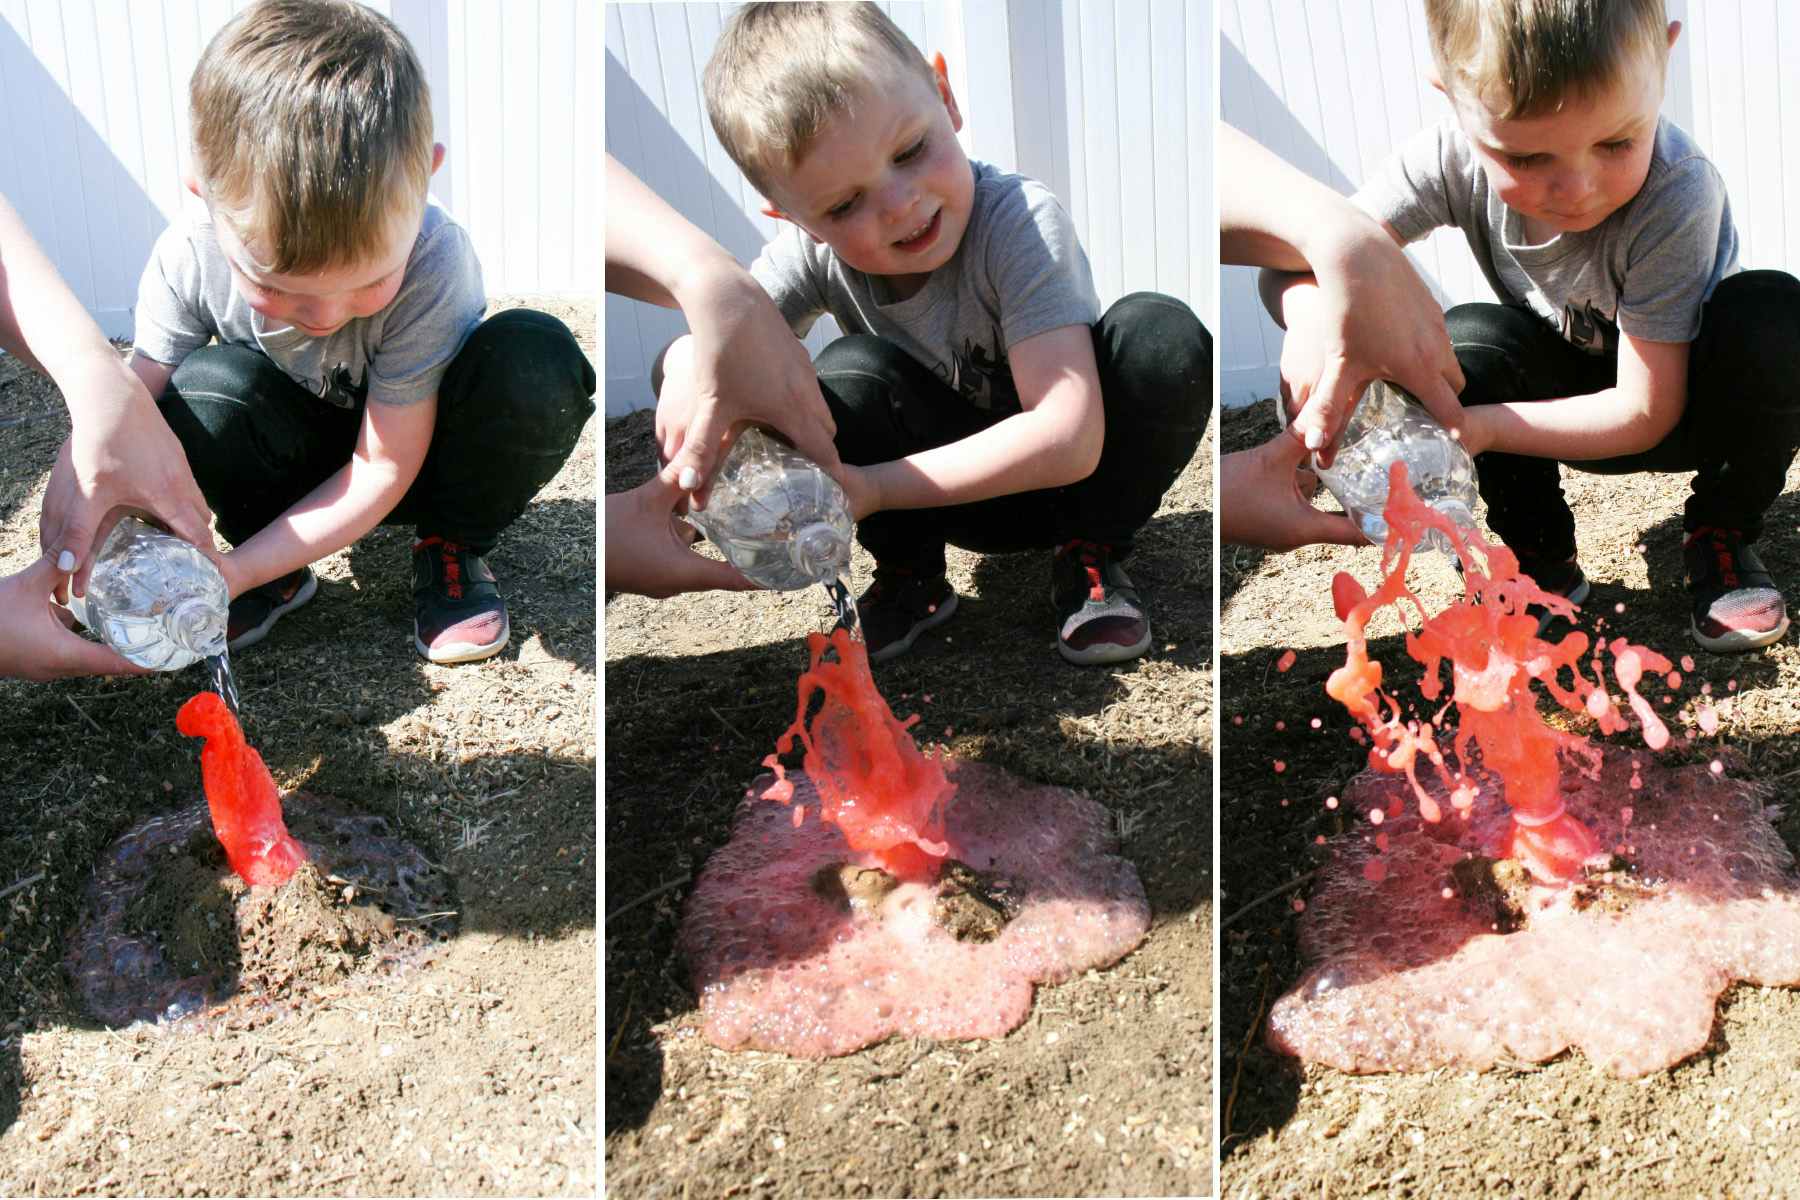 three images of a child pouring vinegar into a bottle buried into the ground with red baking soda in the bottle making a red liquid explosion 